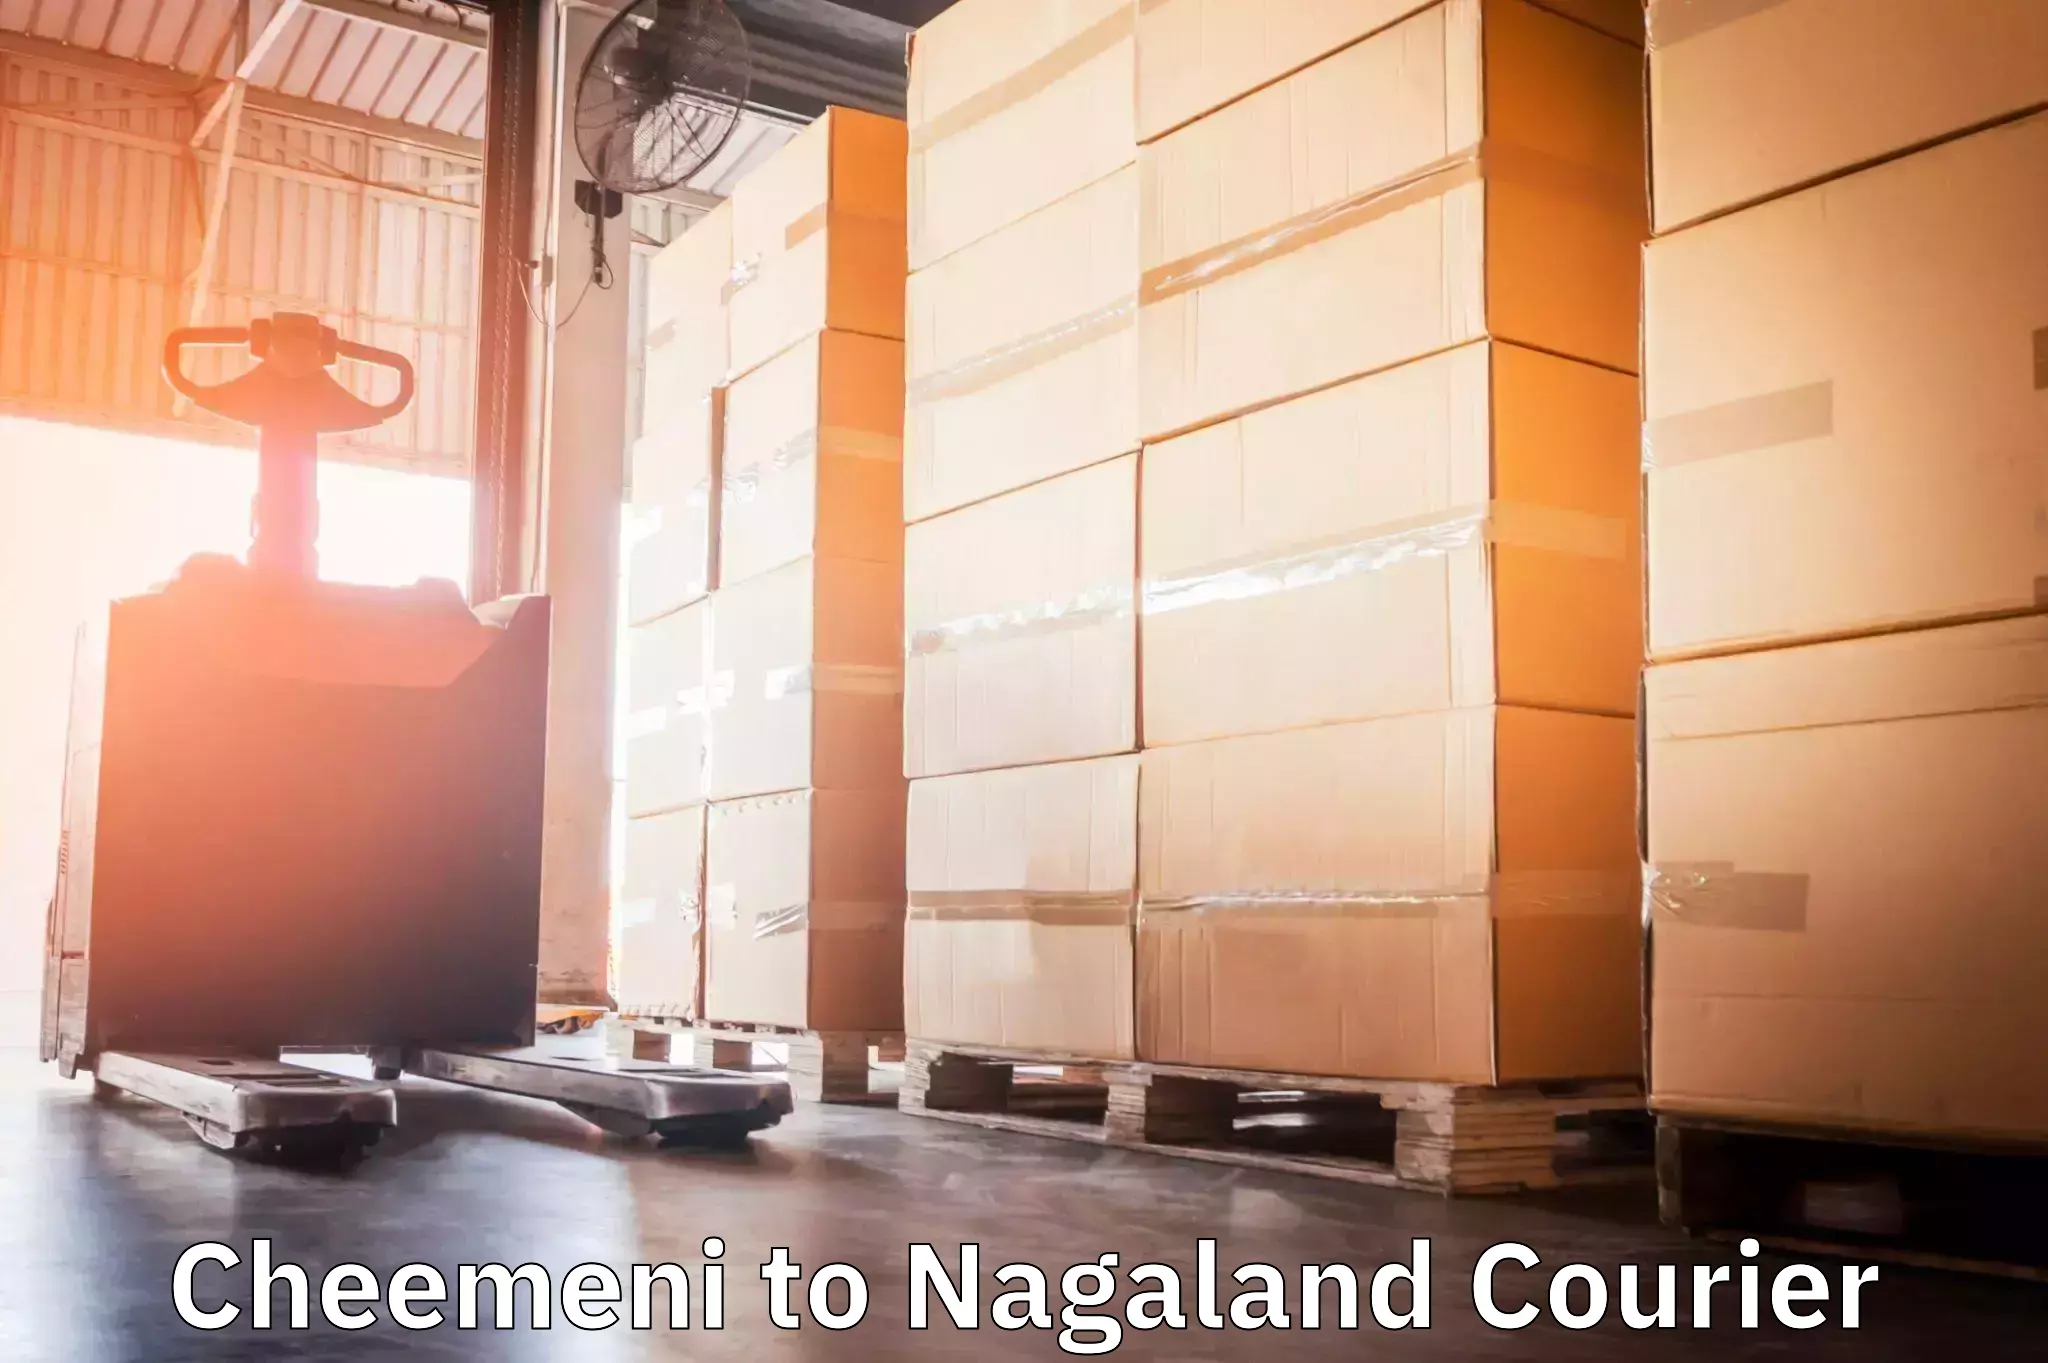 Parcel service for businesses Cheemeni to Nagaland